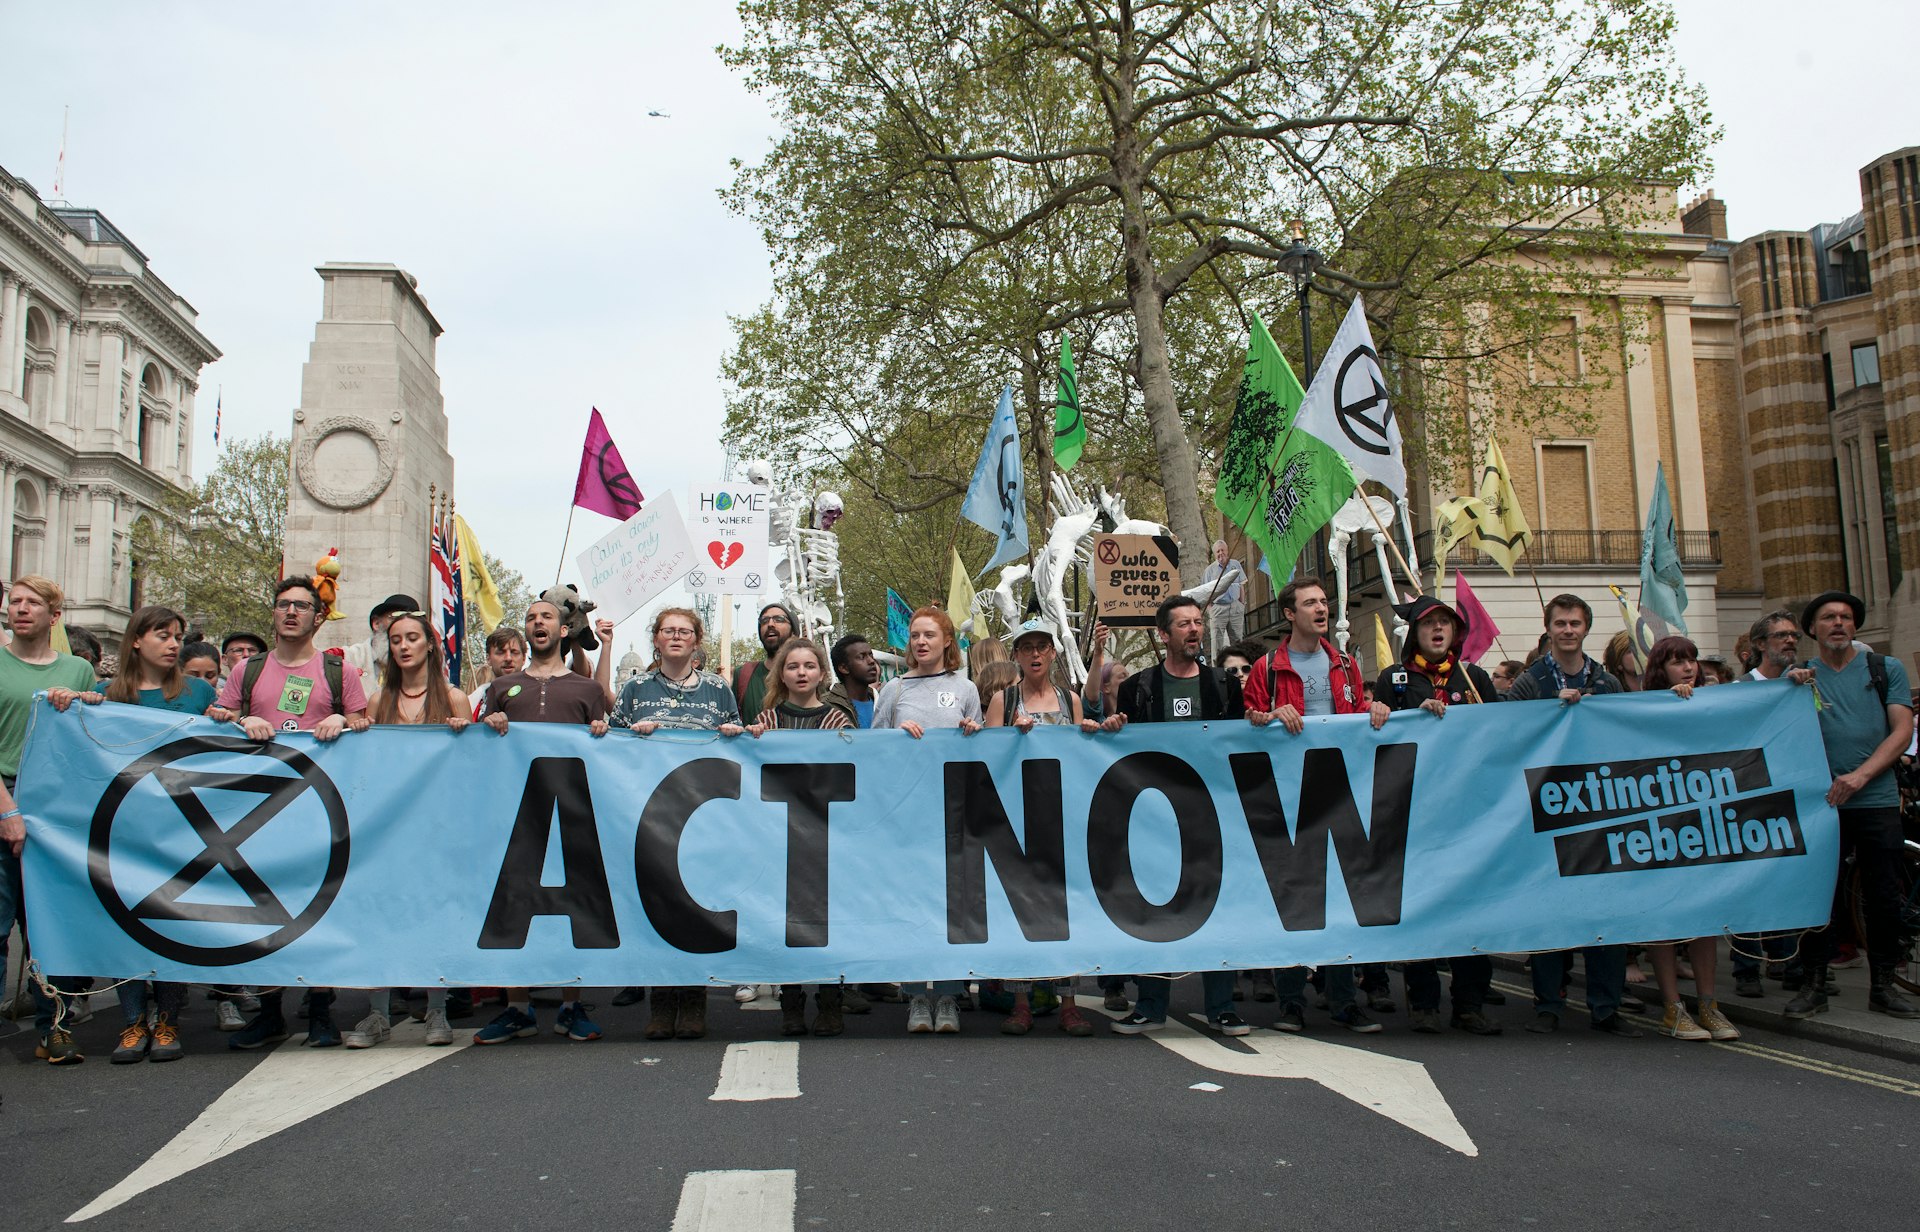 An image of Extinction Rebellion protested in central London. The crowd are carrying a large blue banner reading 'ACT NOW' as well as flags and other smaller signs. 